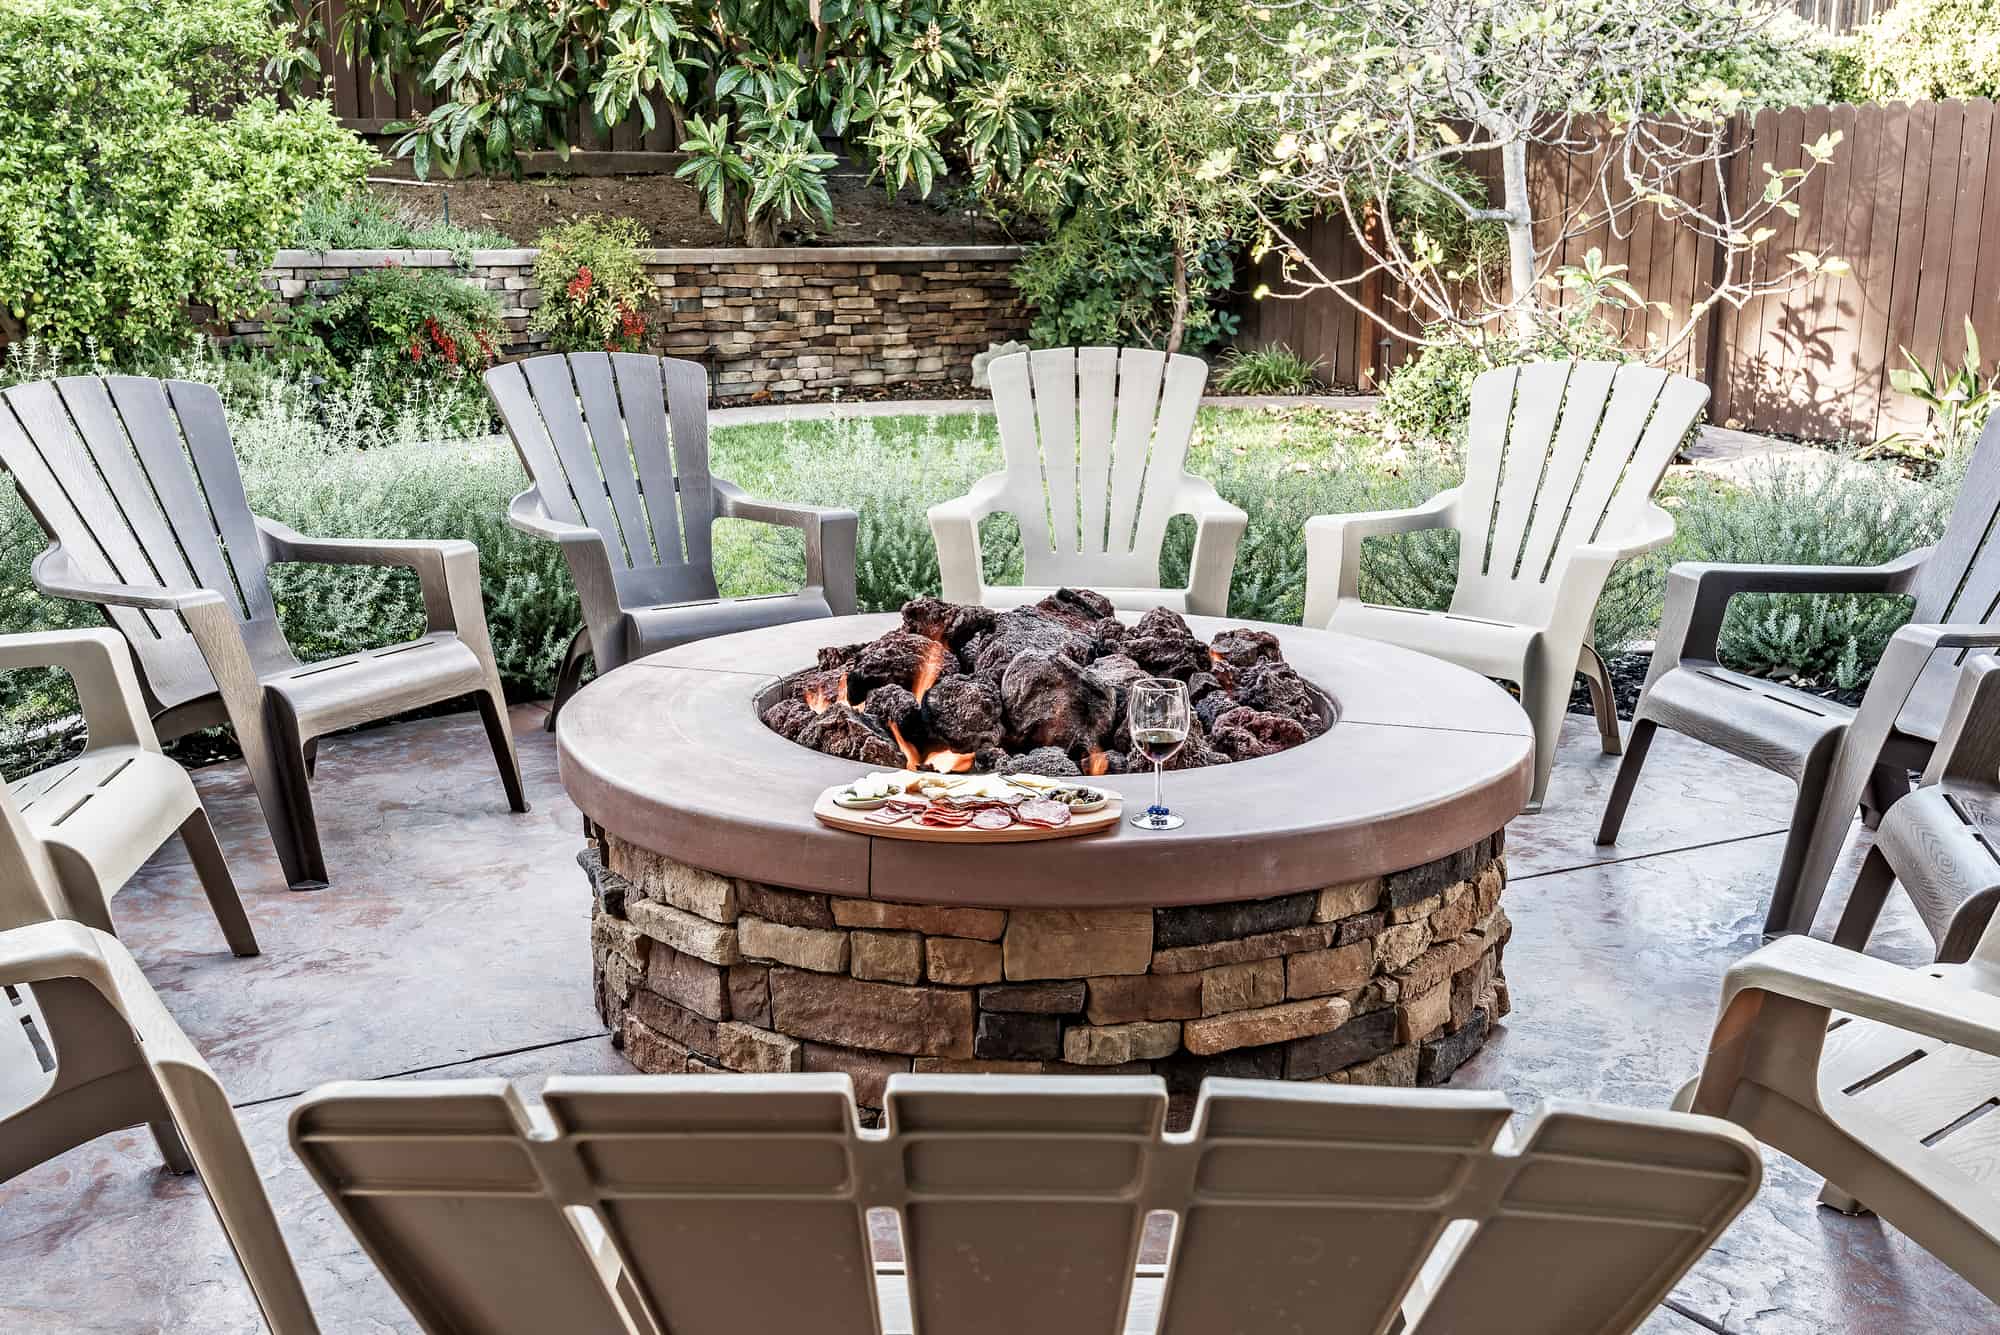 Can I Burn Wood In A Gas Fire Pit, Artificial Logs For Gas Fire Pit